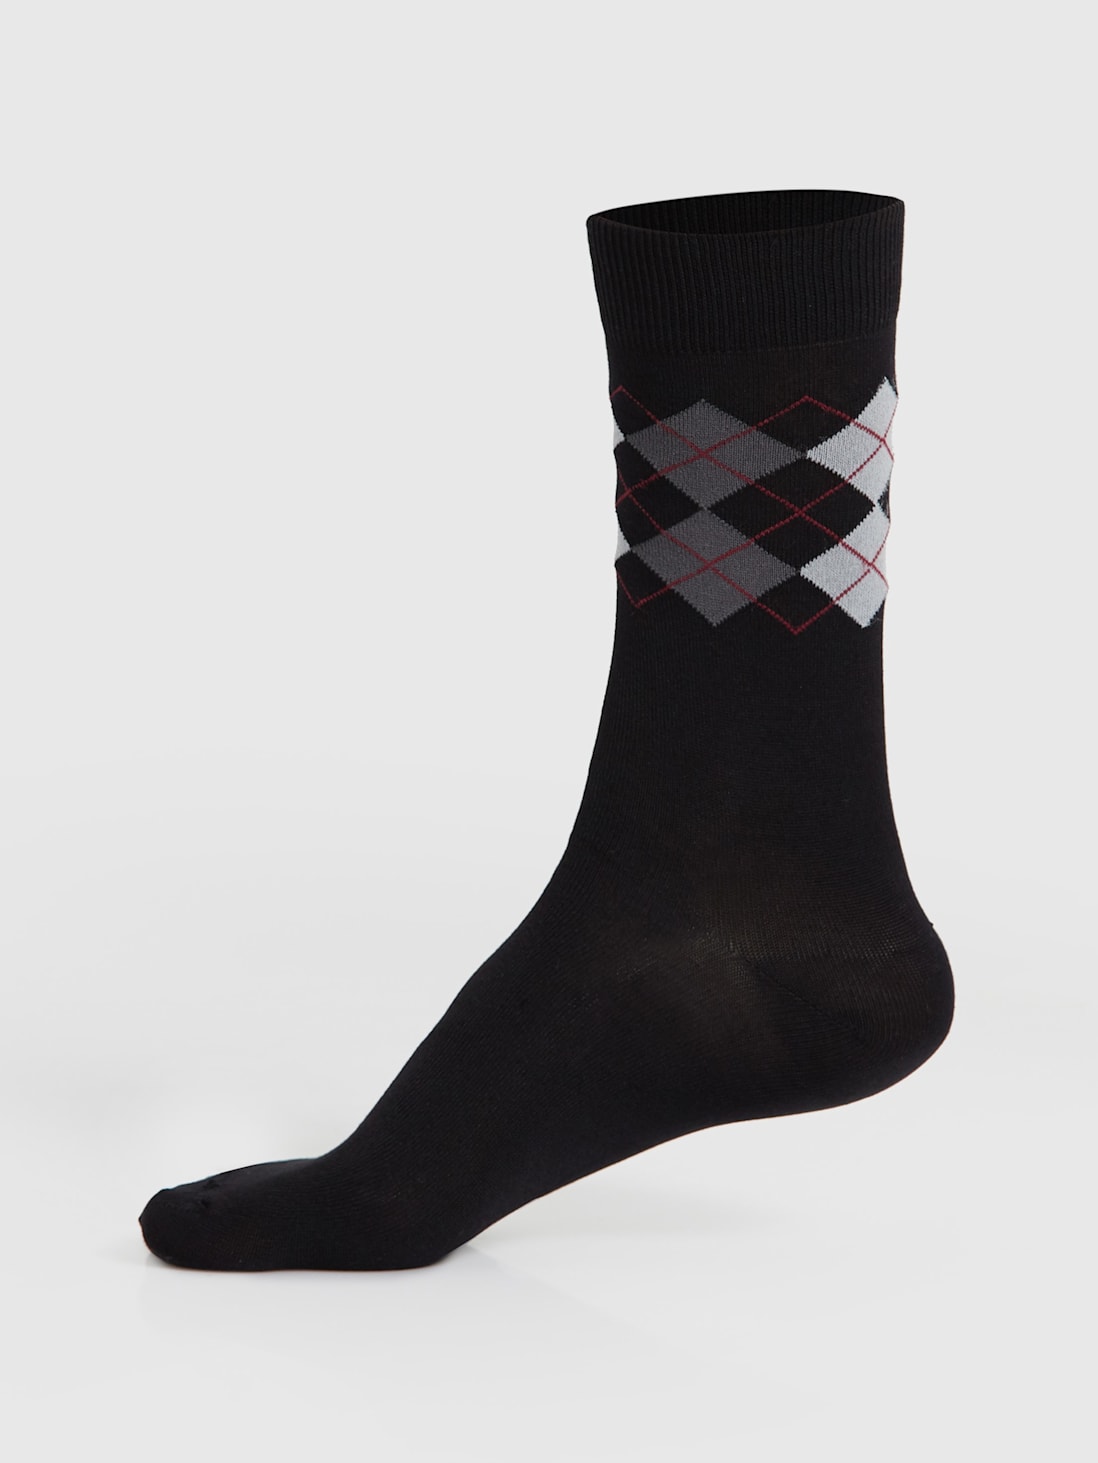 How To Buy Top Quality Socks  A Mans Guide to Buying Dress Socks   Purchase The Perfect Sock